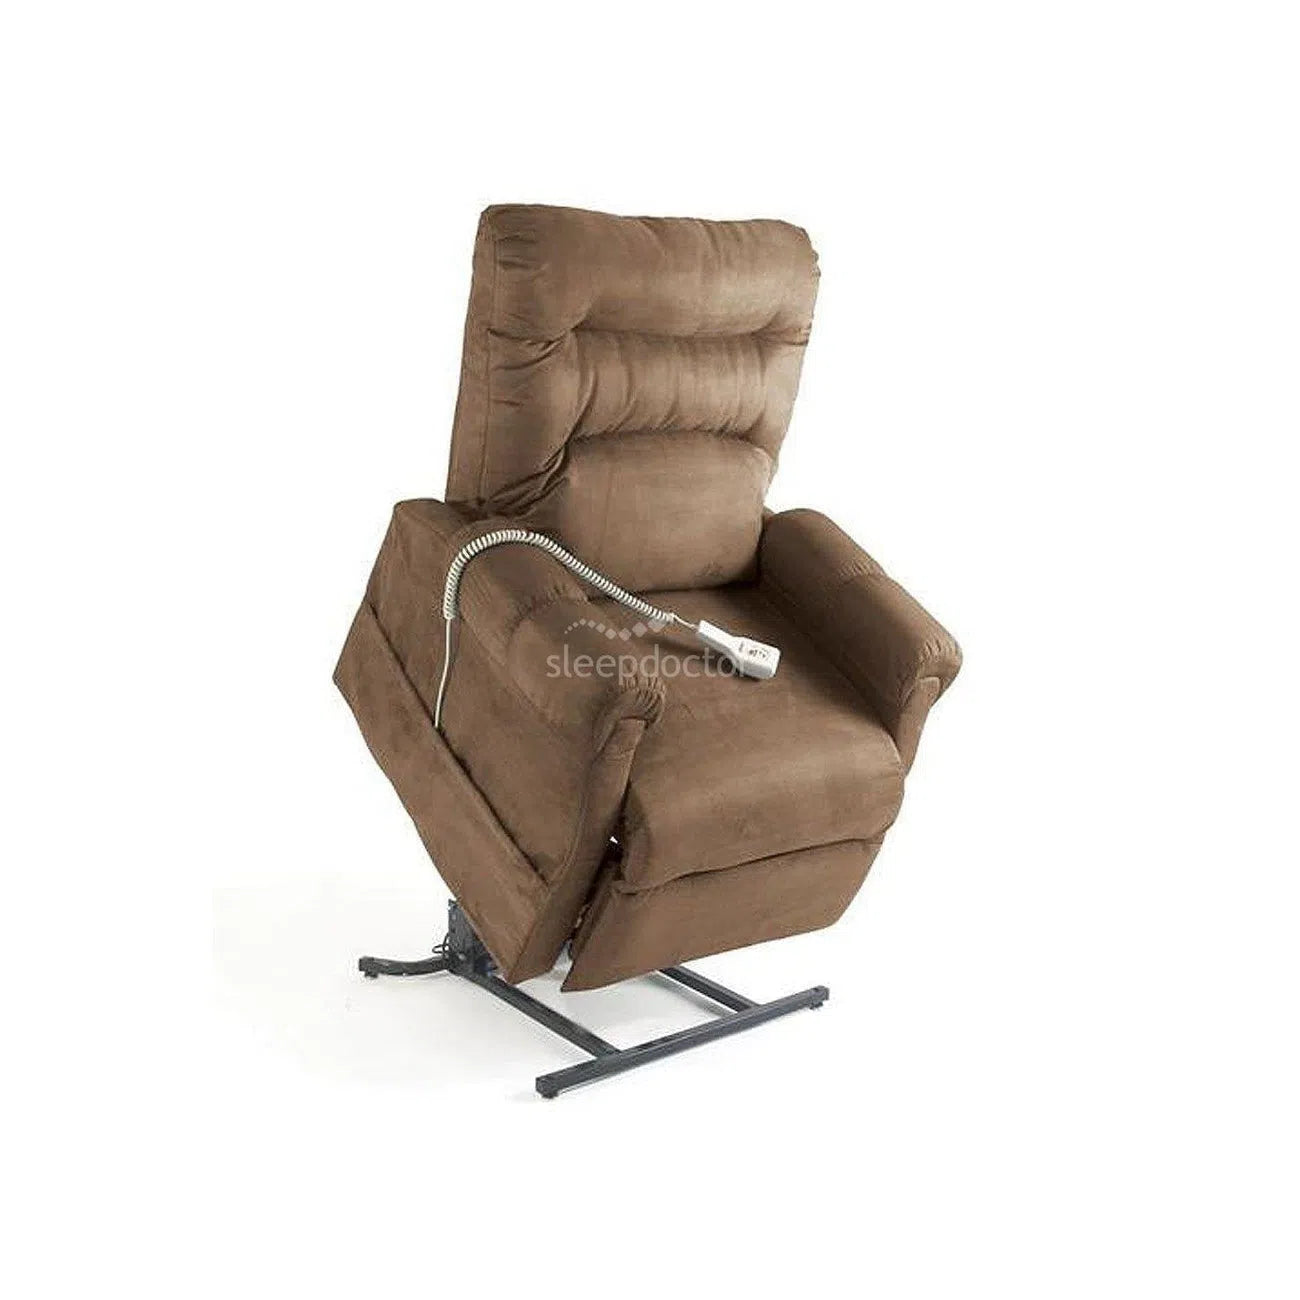 C5 Electric 3 Position Lift Chair by Pride Moblity-Sleep Doctor